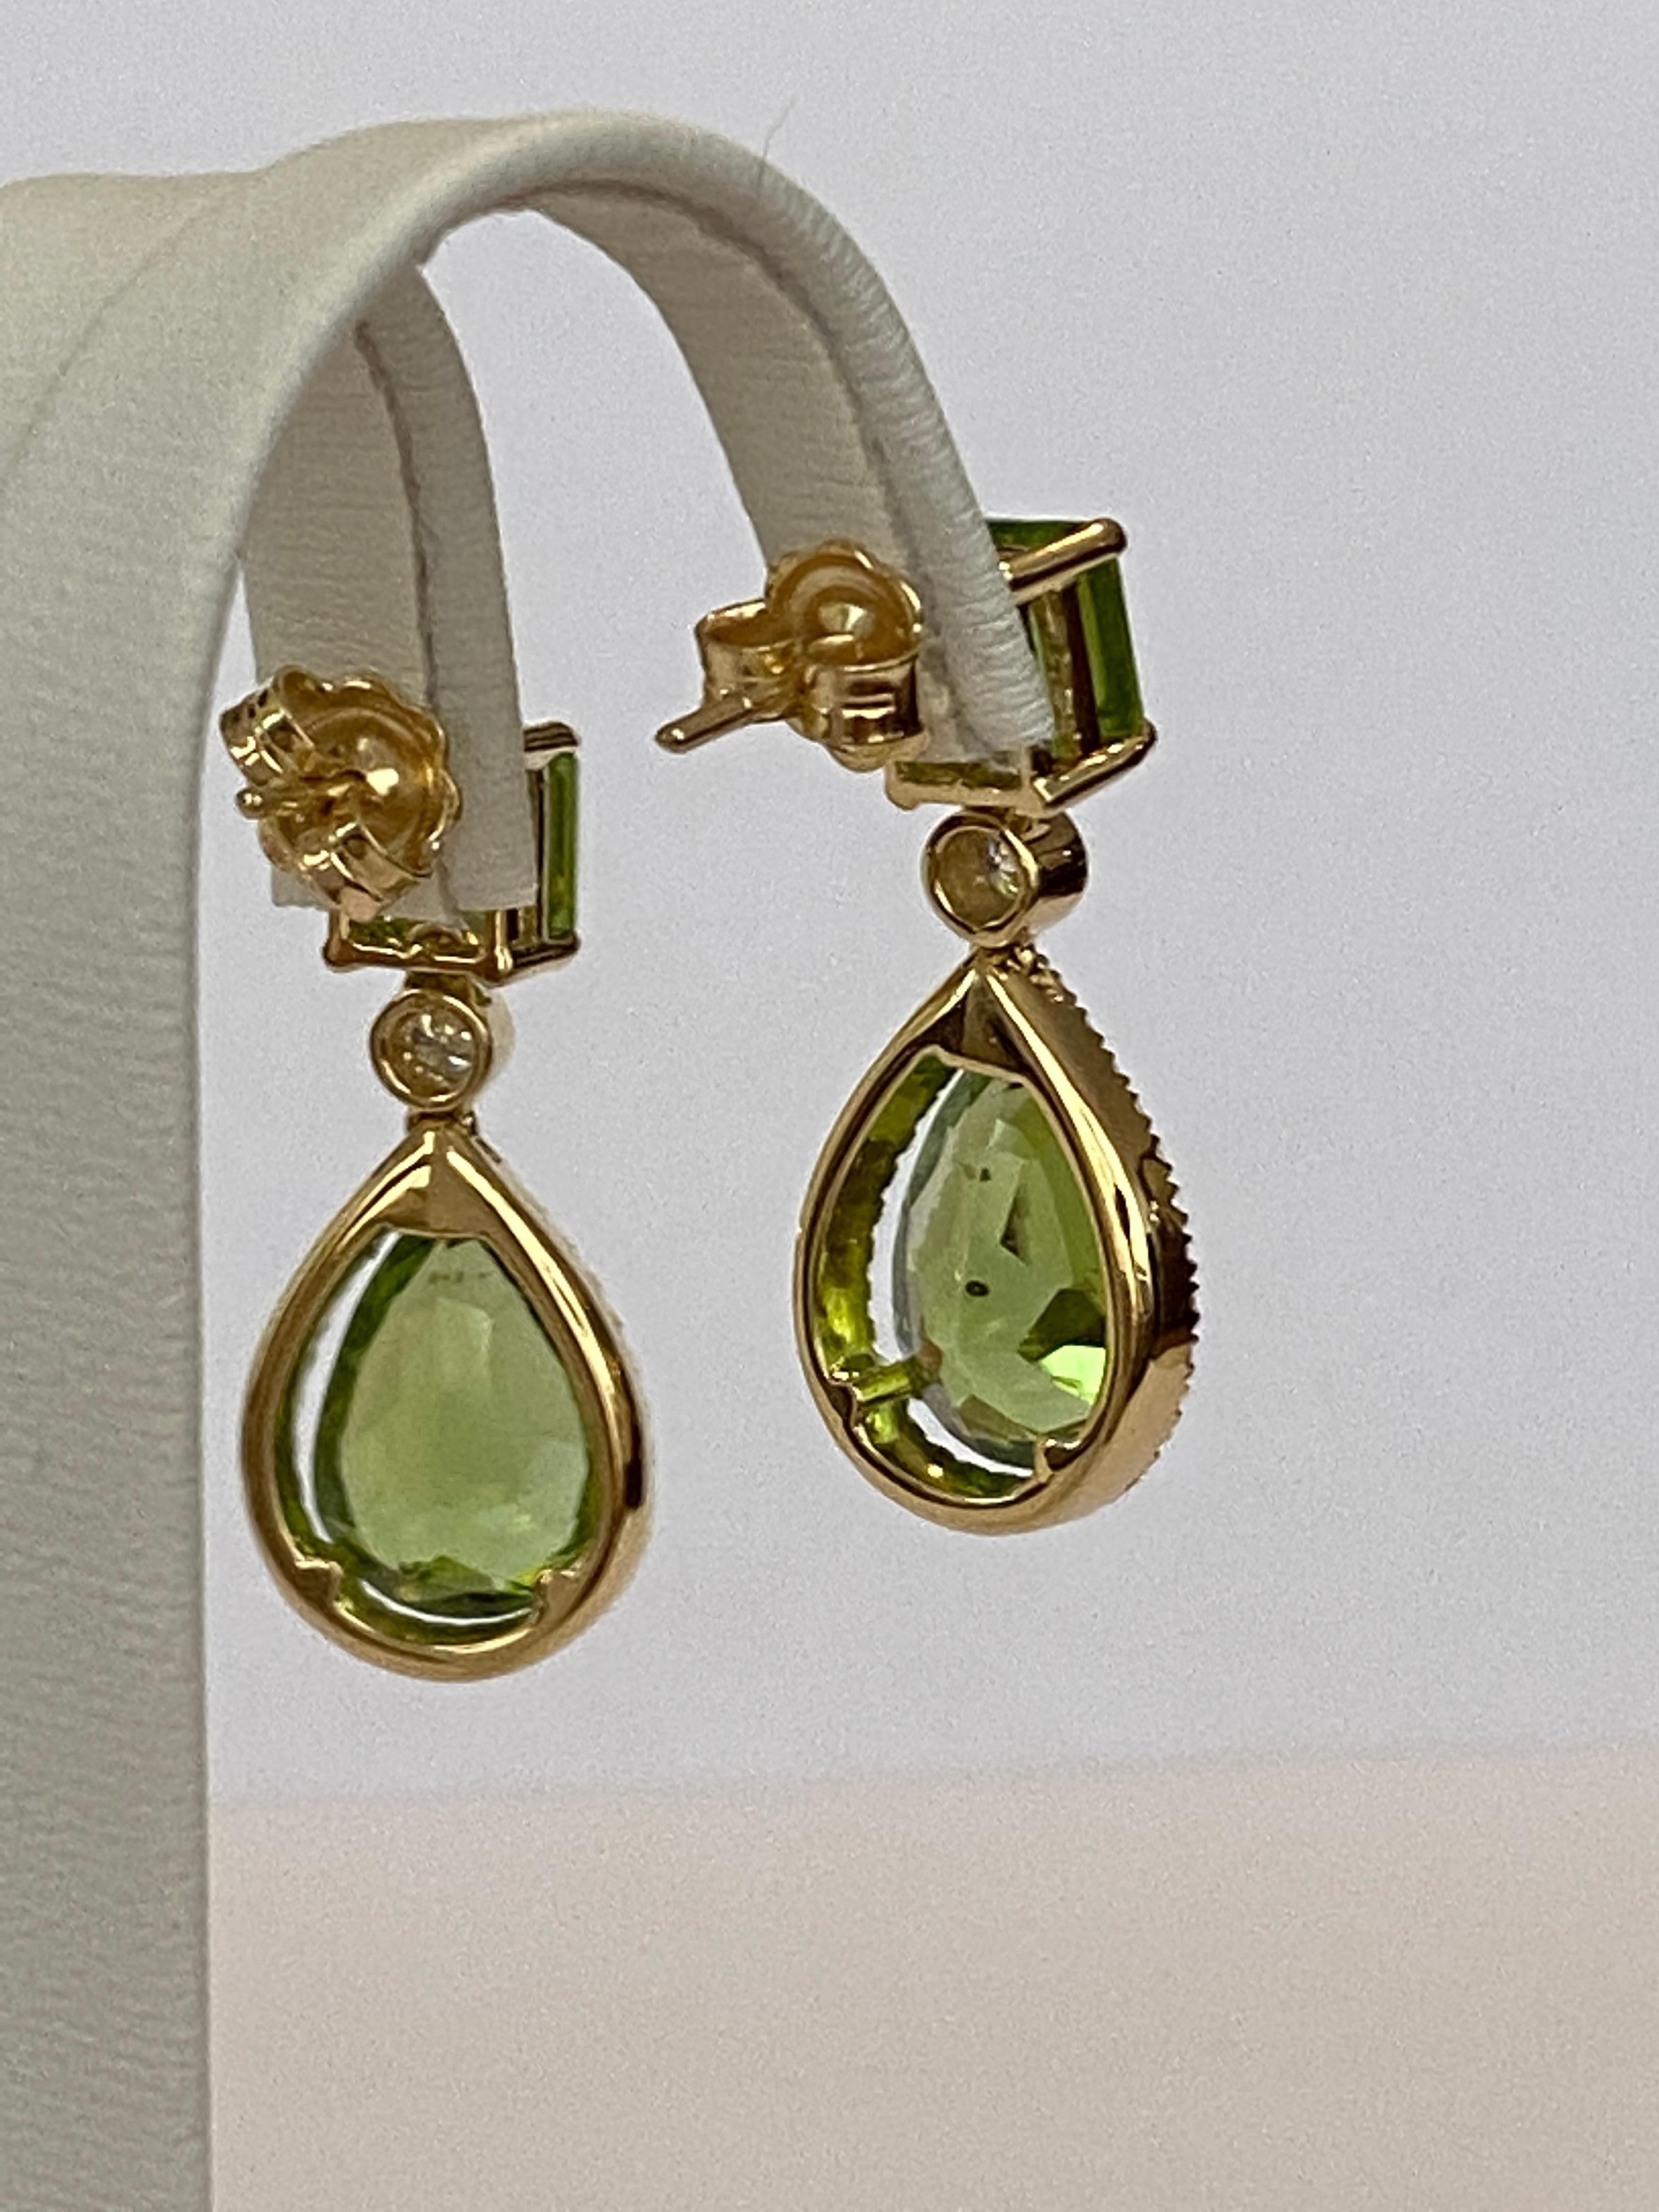 ALGT certified 18 kt gold Peridot Earrings with Diamonds For Sale 3